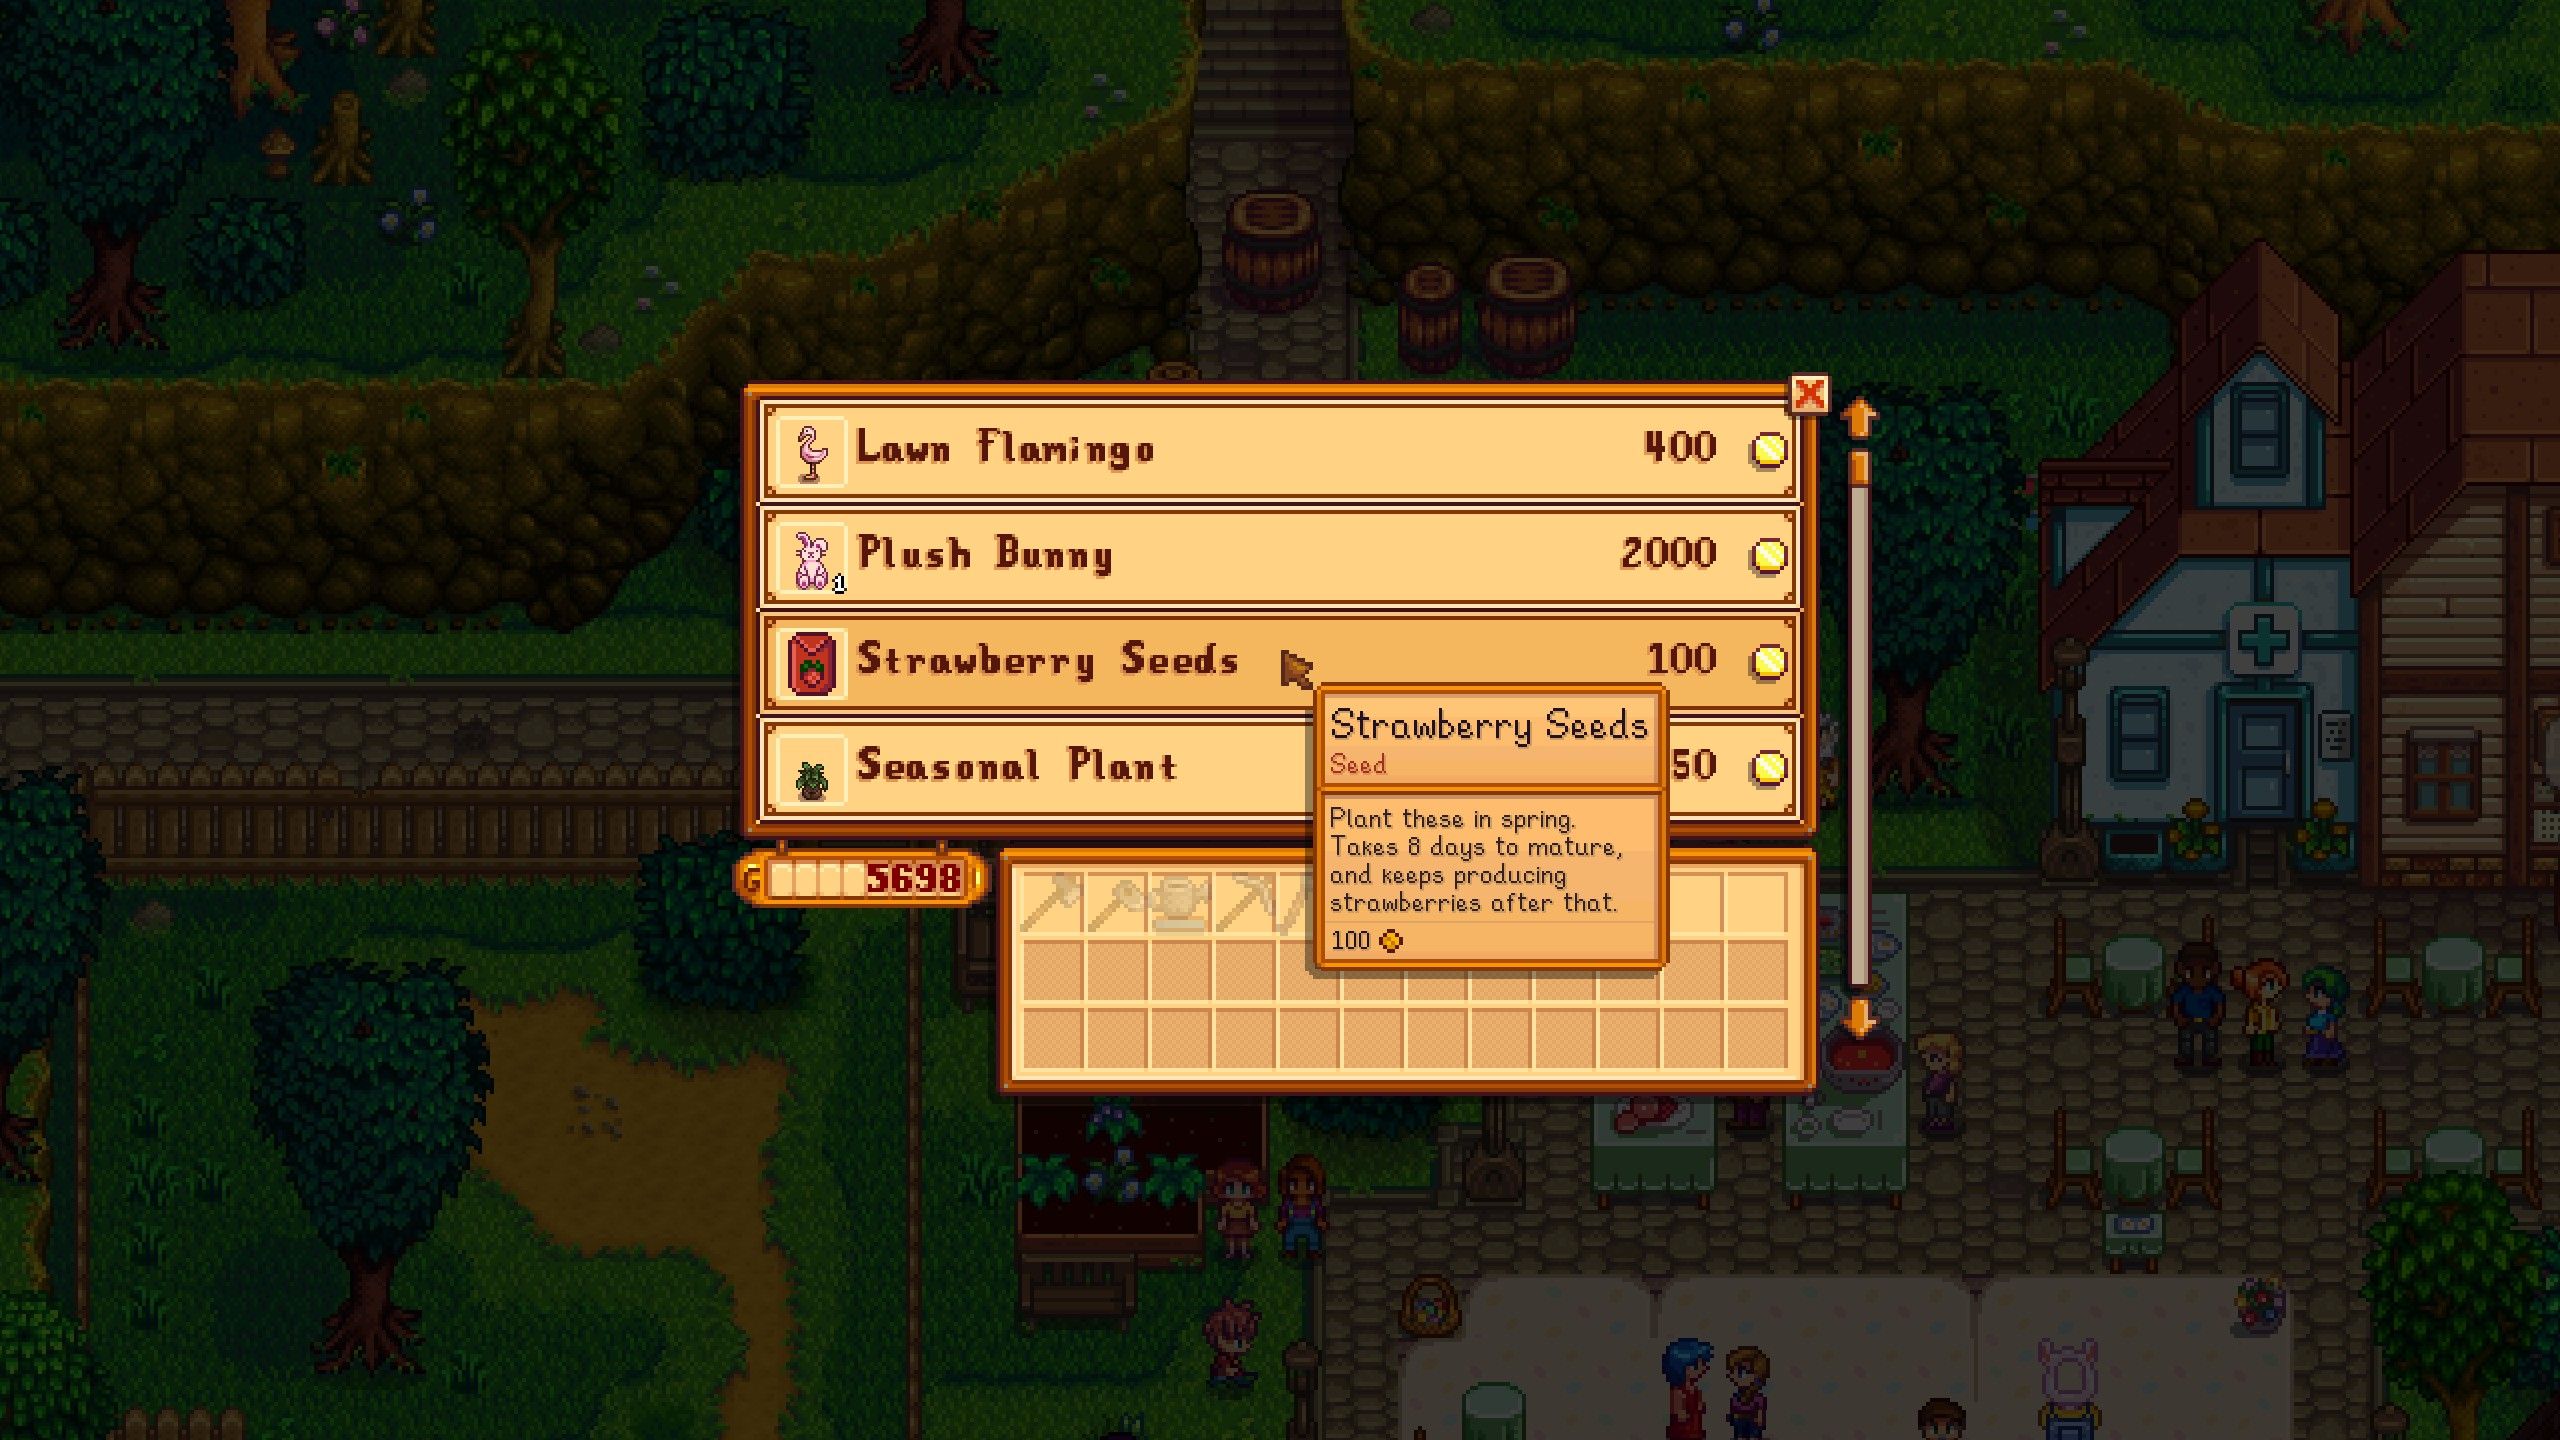 Stardew Valley Player Purchasing Strawberry Seeds From Pierre During Egg Festival In Spring